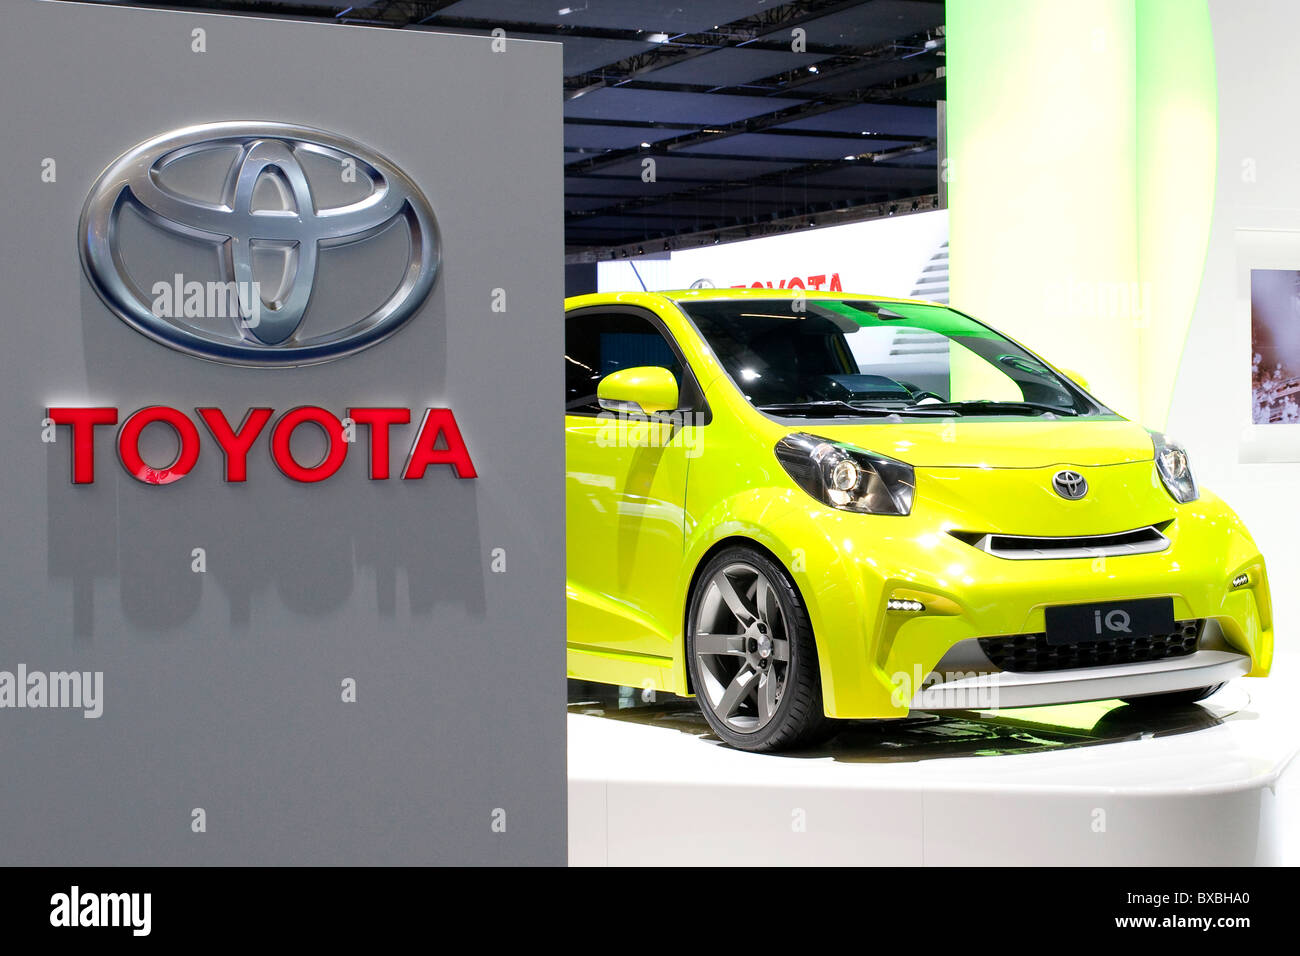 Logo of the Toyota auto maker with a IQ compact car at the 63. Internationale Automobilausstellung International Motor Show IAA Stock Photo